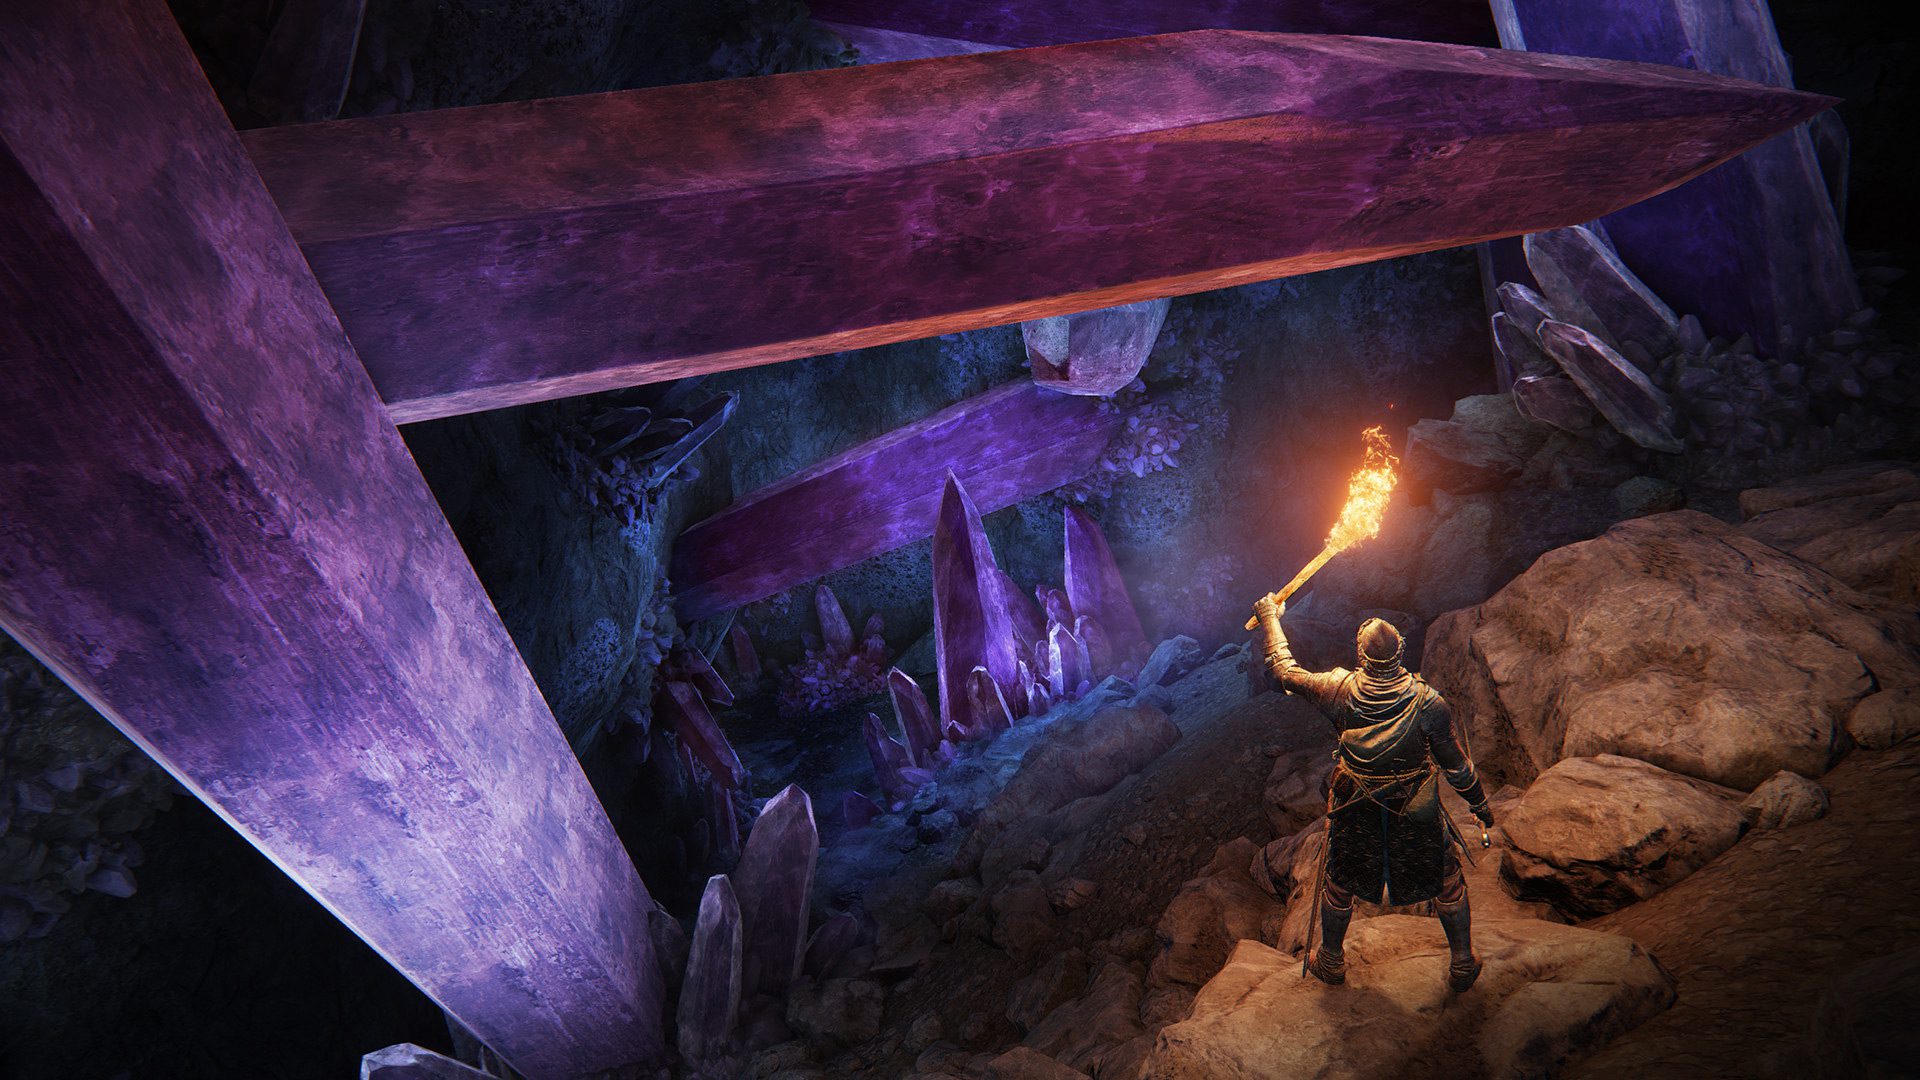 Exploration of a crystal cave lit by torches